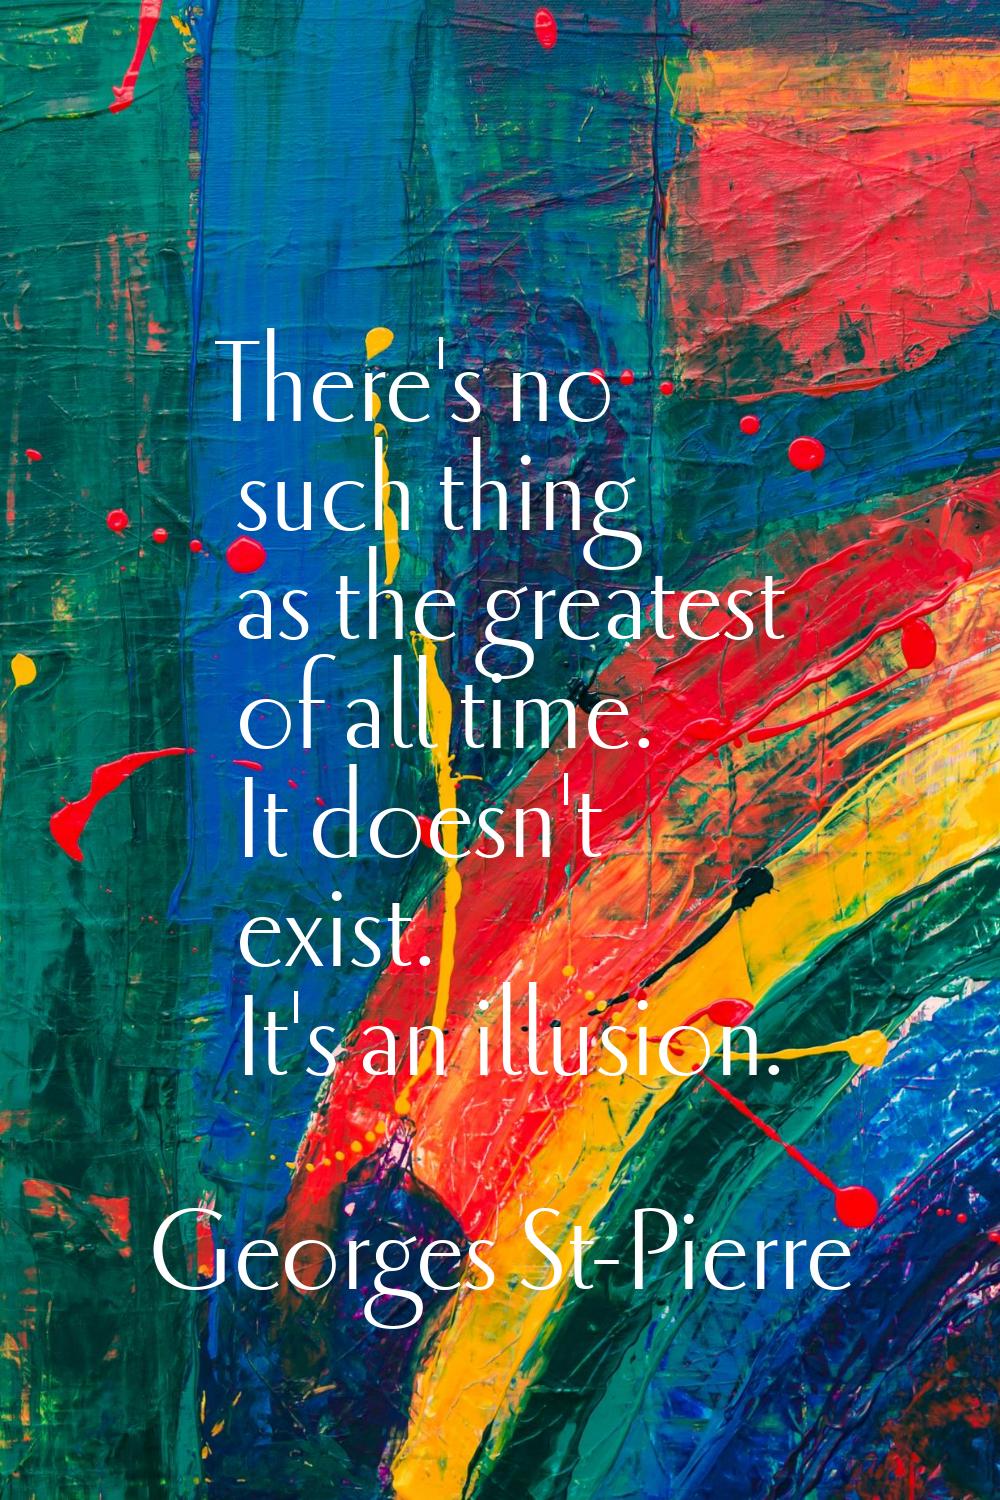 There's no such thing as the greatest of all time. It doesn't exist. It's an illusion.